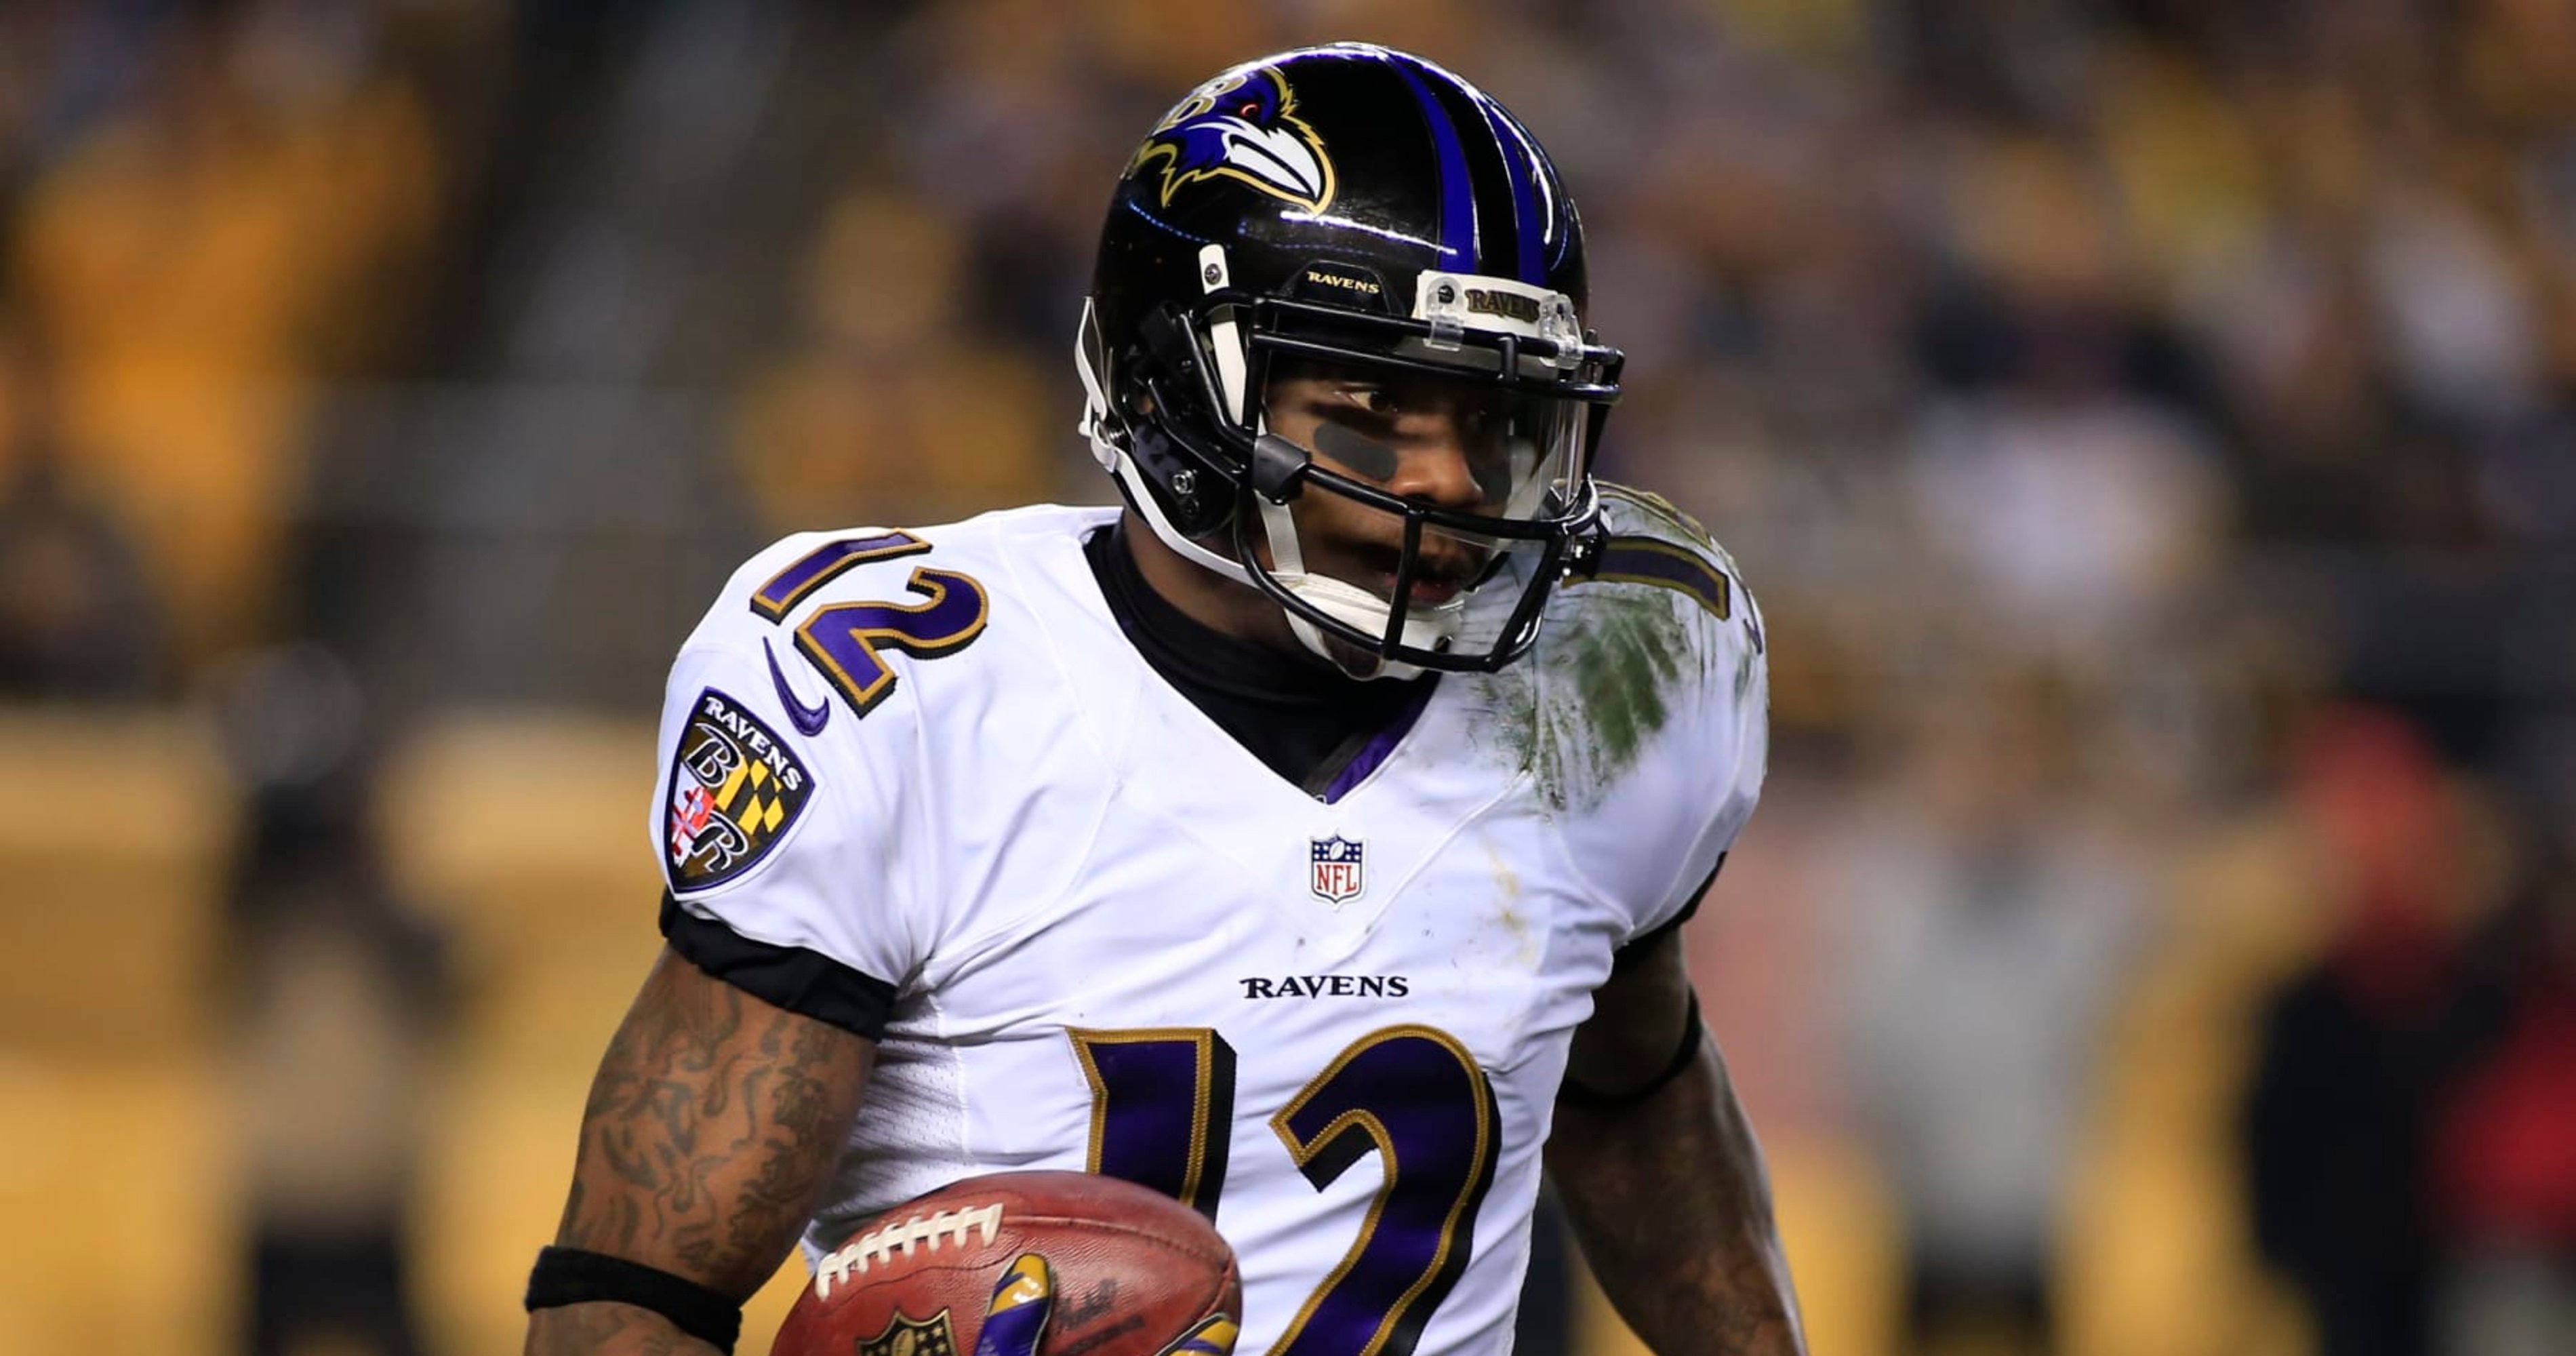 Jacoby Jones Dies at 40; Former NFL WR Won Super Bowl 47 with Ravens in 2013